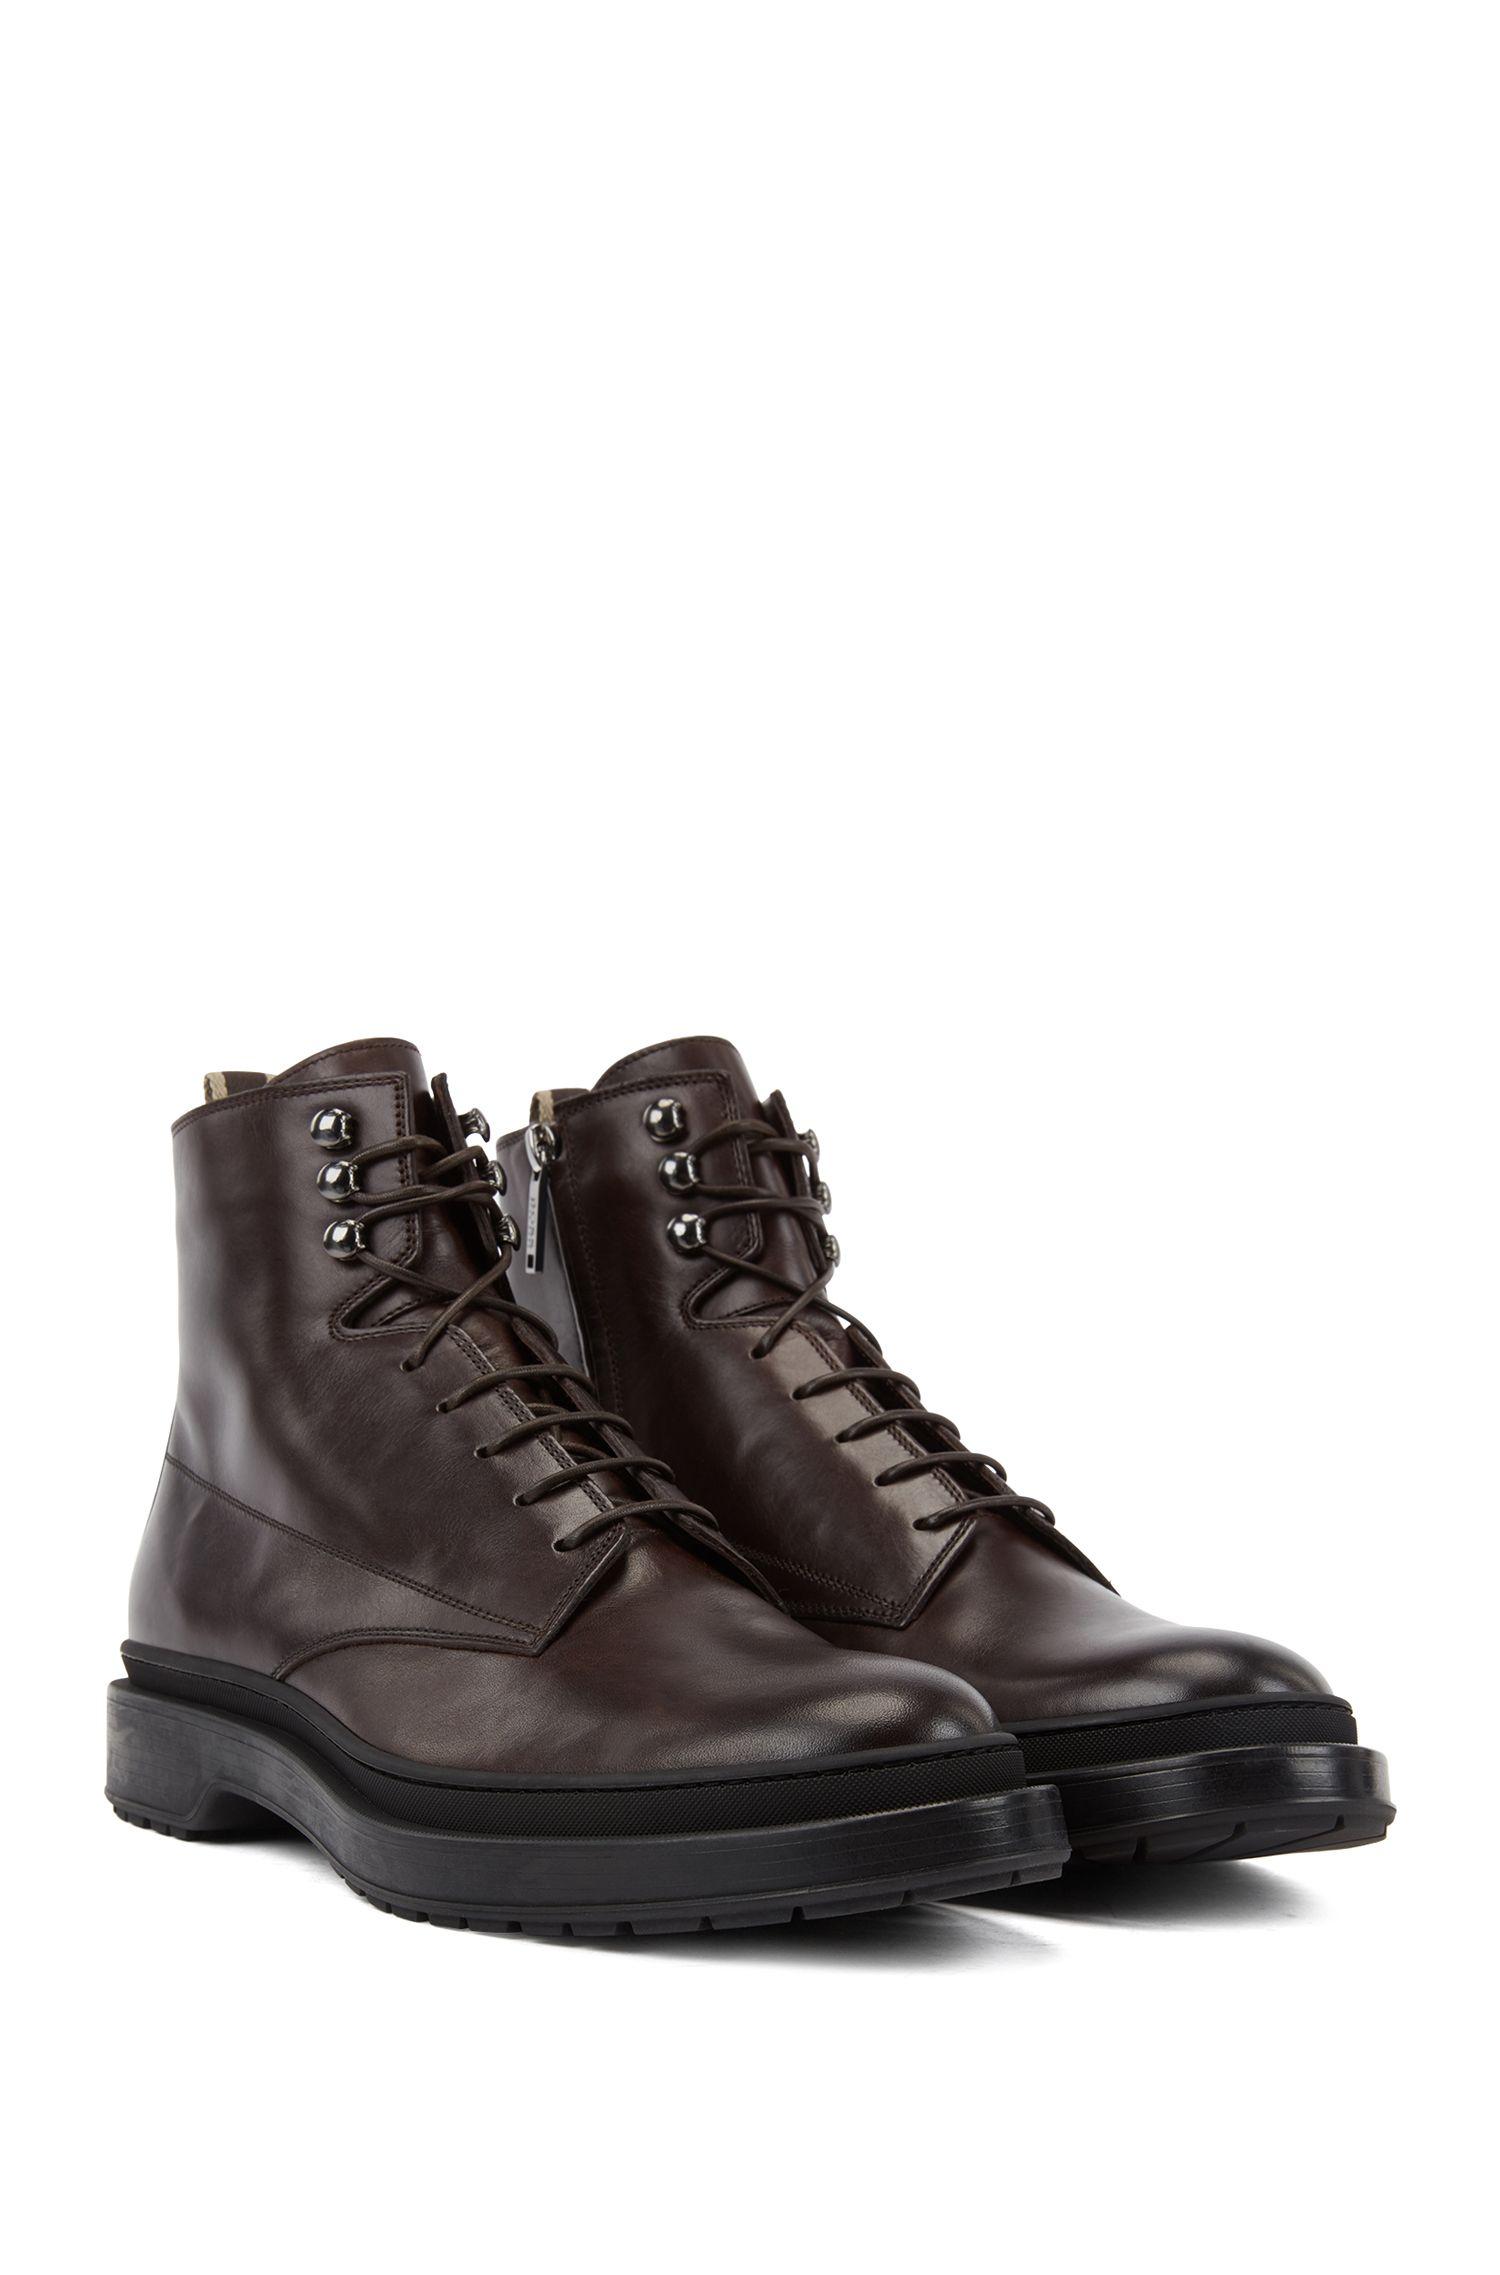 BOSS by Hugo Boss Lace Up Boots In Leather With Shearling Lining in ...